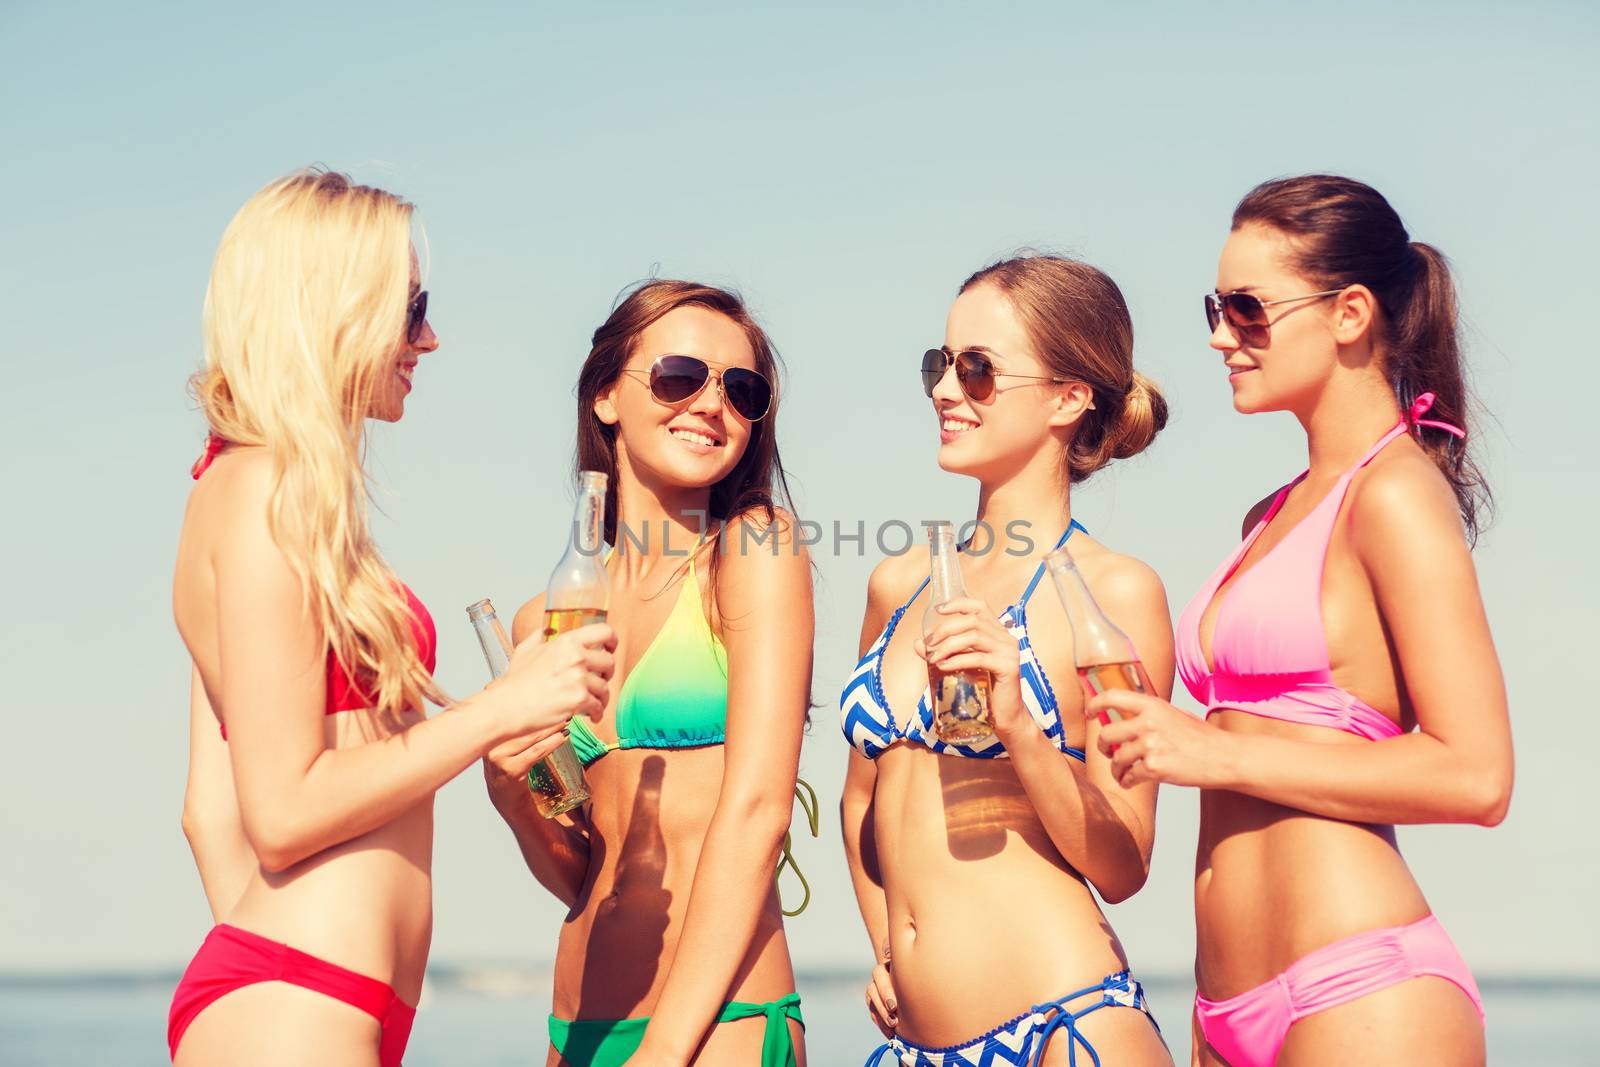 group of smiling young women drinking on beach by dolgachov